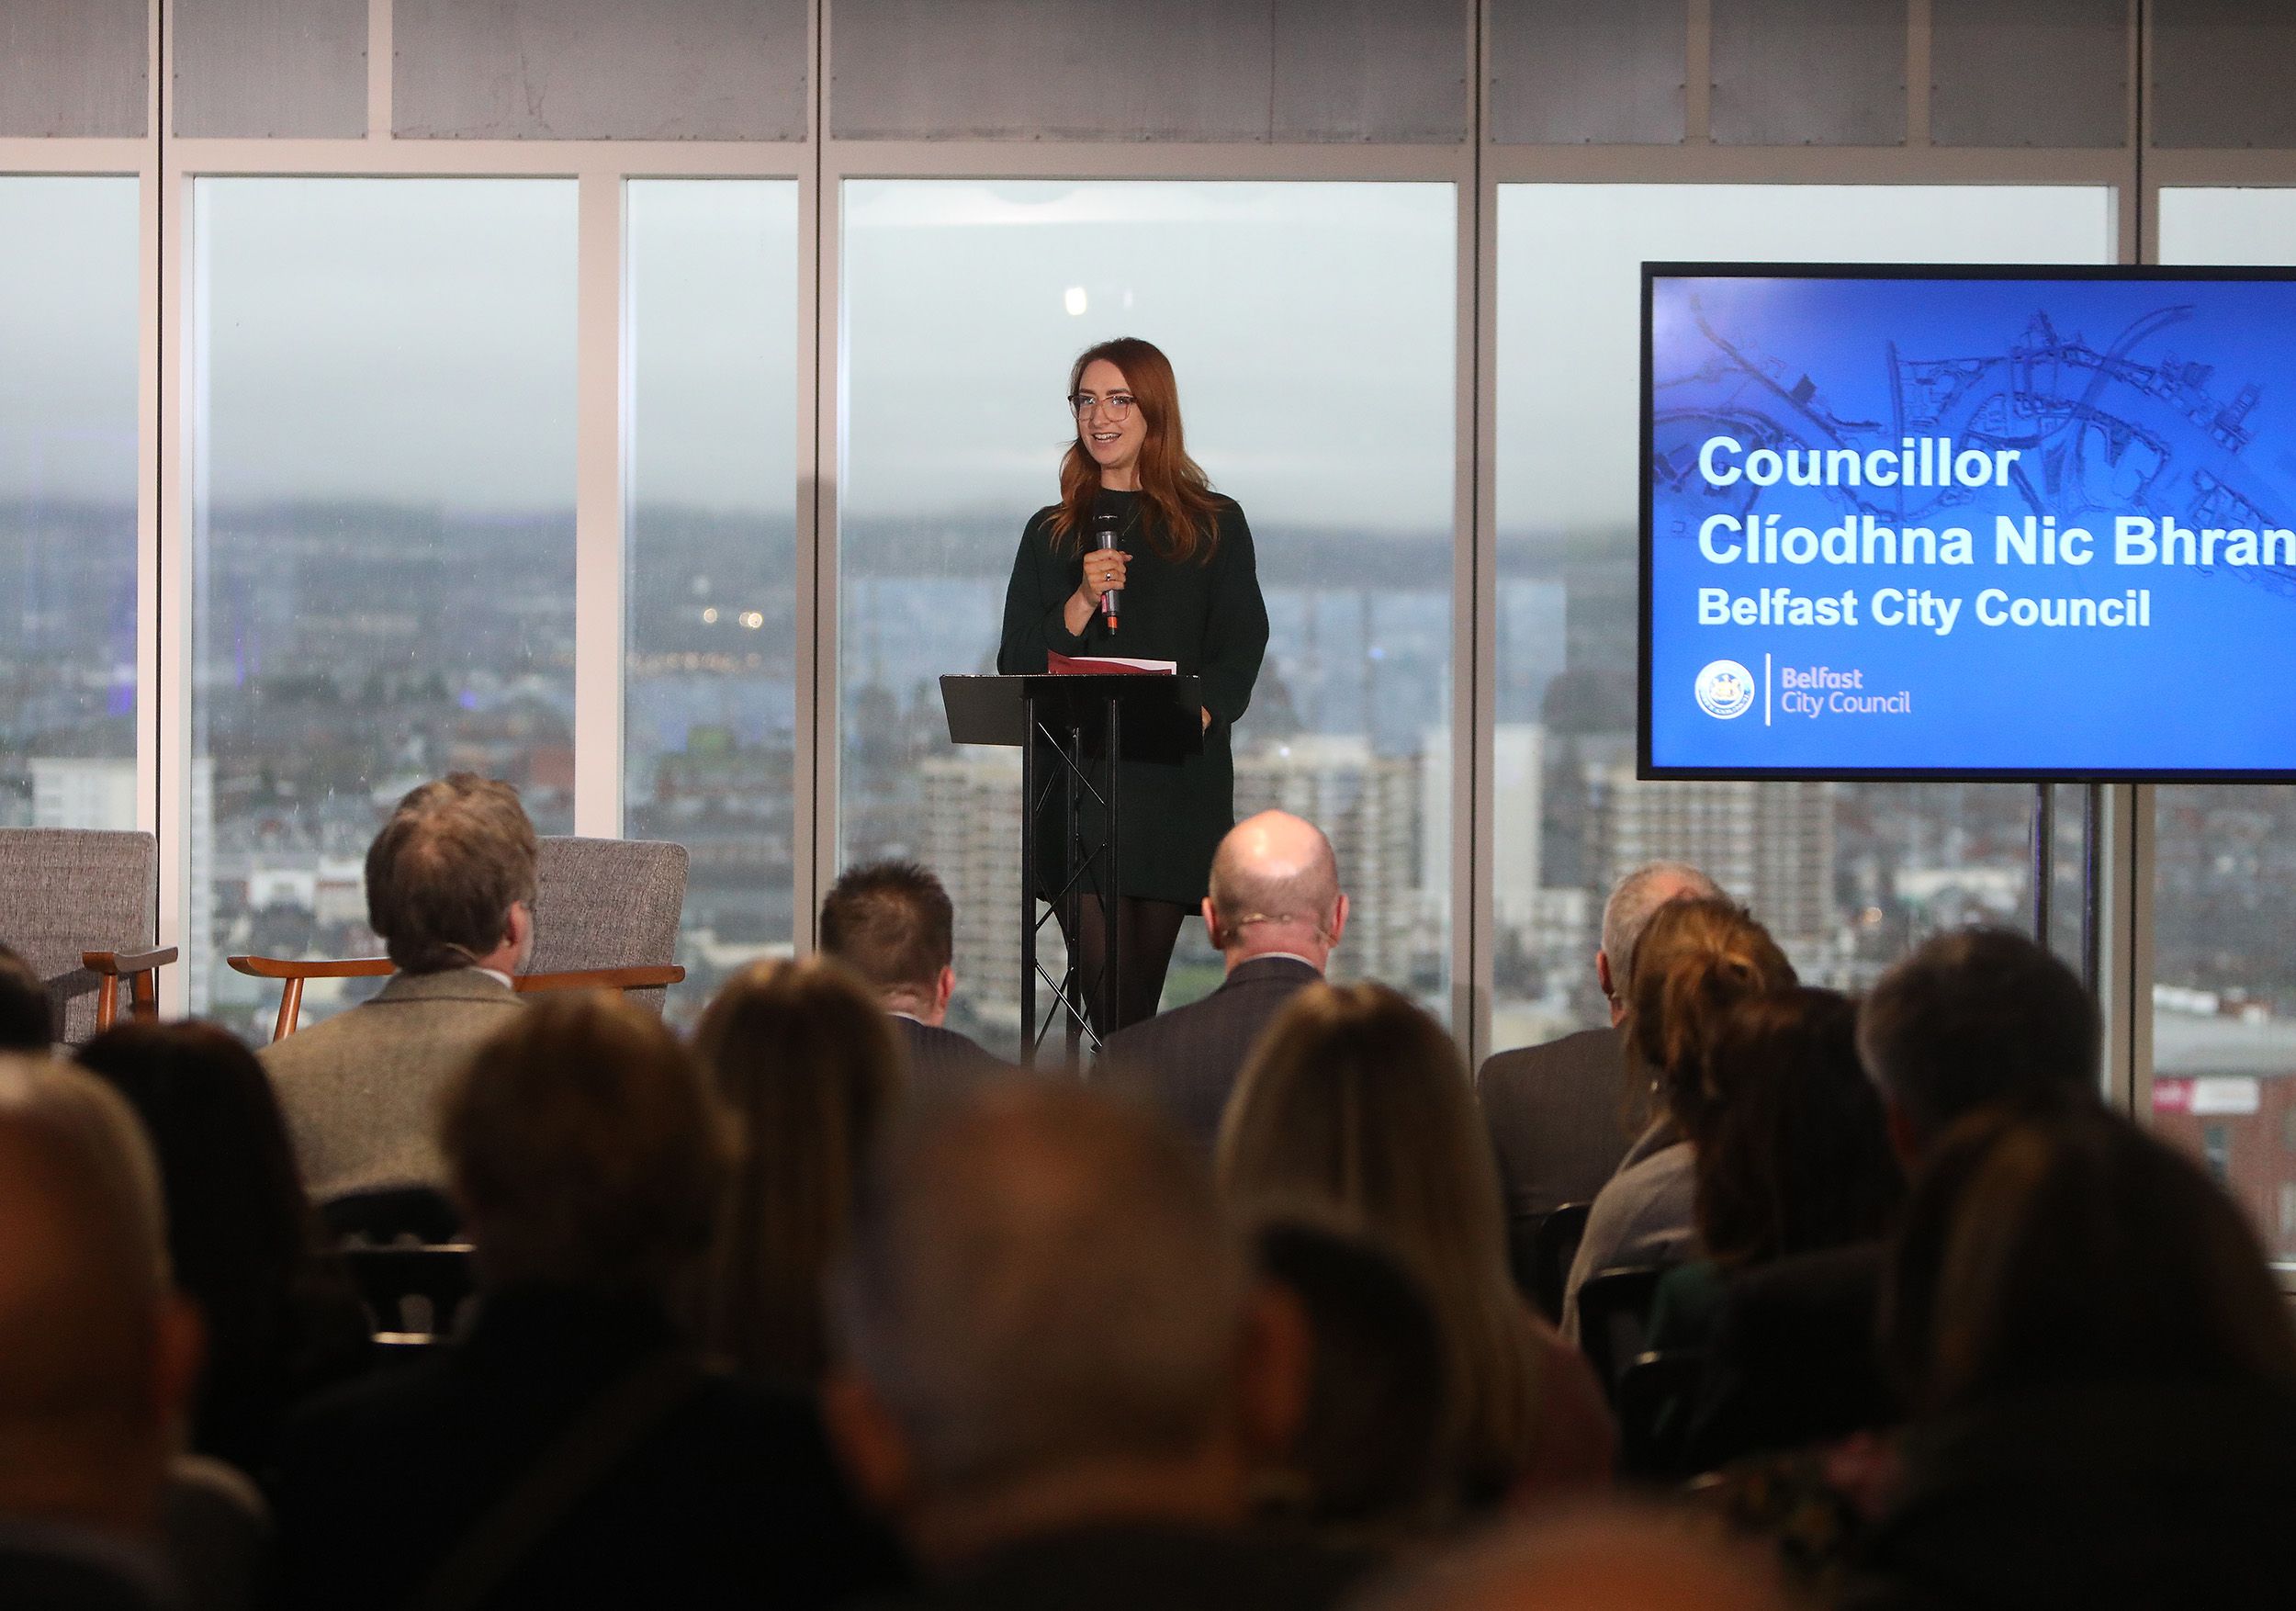 A RIVER RUNS THROUGH IT: Cllr Clíodhna Nic Bhranair addressing the launch of the Belfast Promenade project at an event on the 14th floor of the newly-built City Quays 3 building.